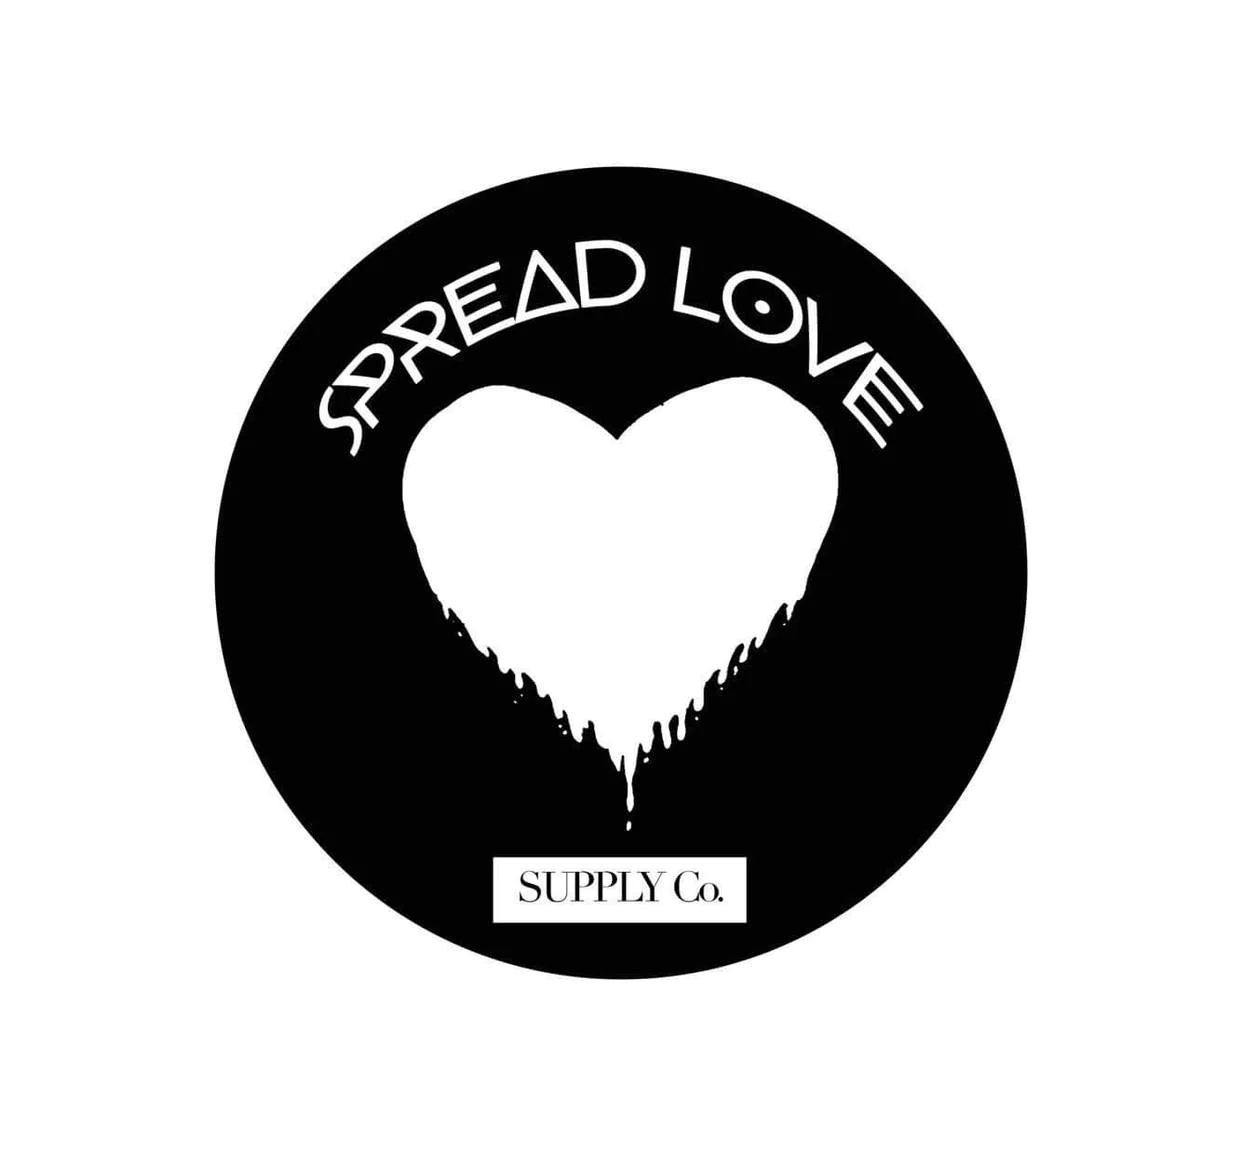 Spread Love Supply Coupons